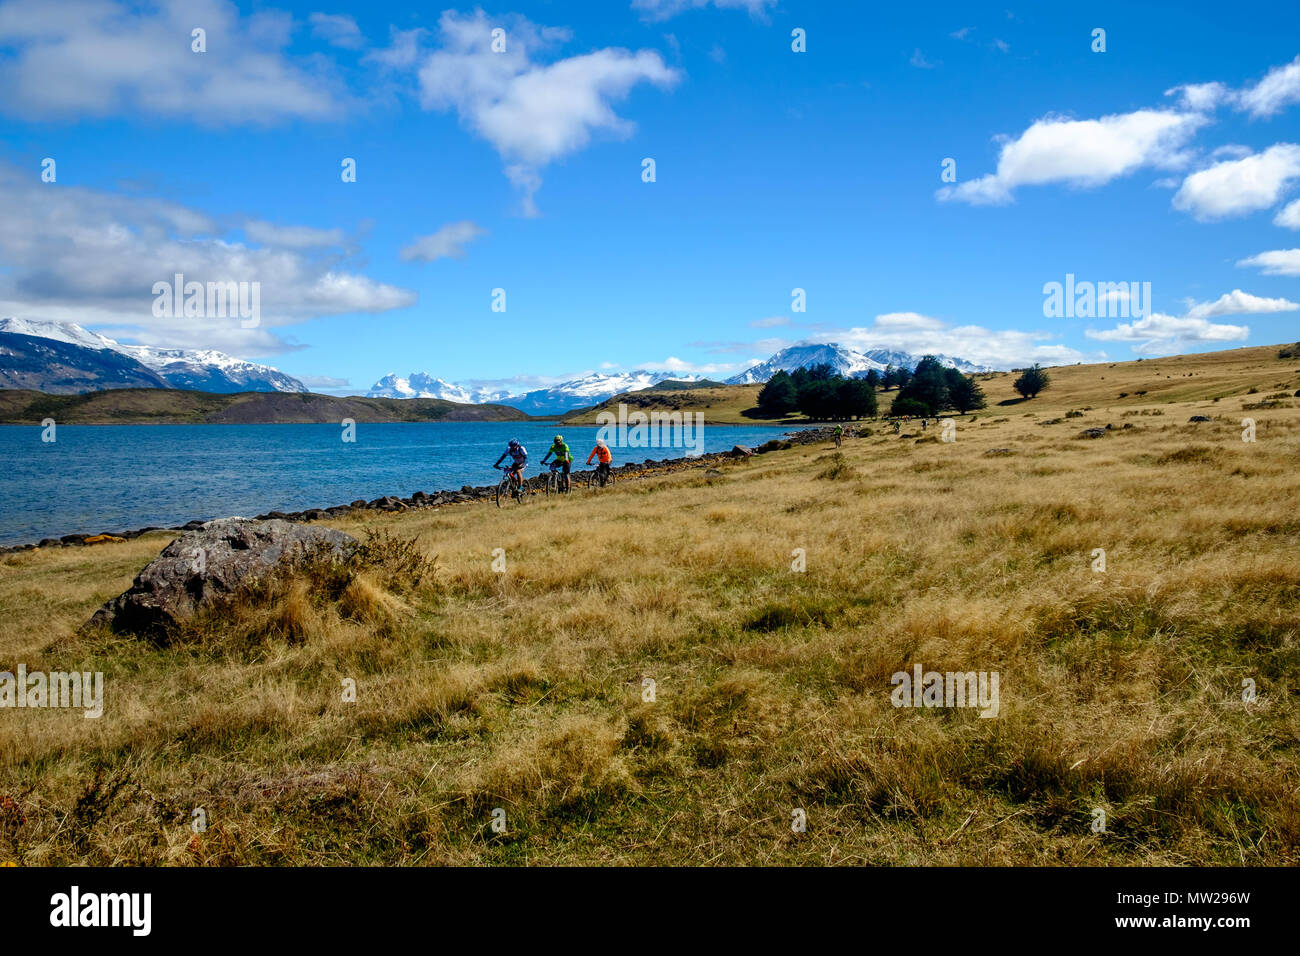 Puerto Natales, Magallanes / Chile - October 16 2016: Mountain bikers ride along a lake in the spectacular surroundings of Puerto Natales, Chile. Stock Photo